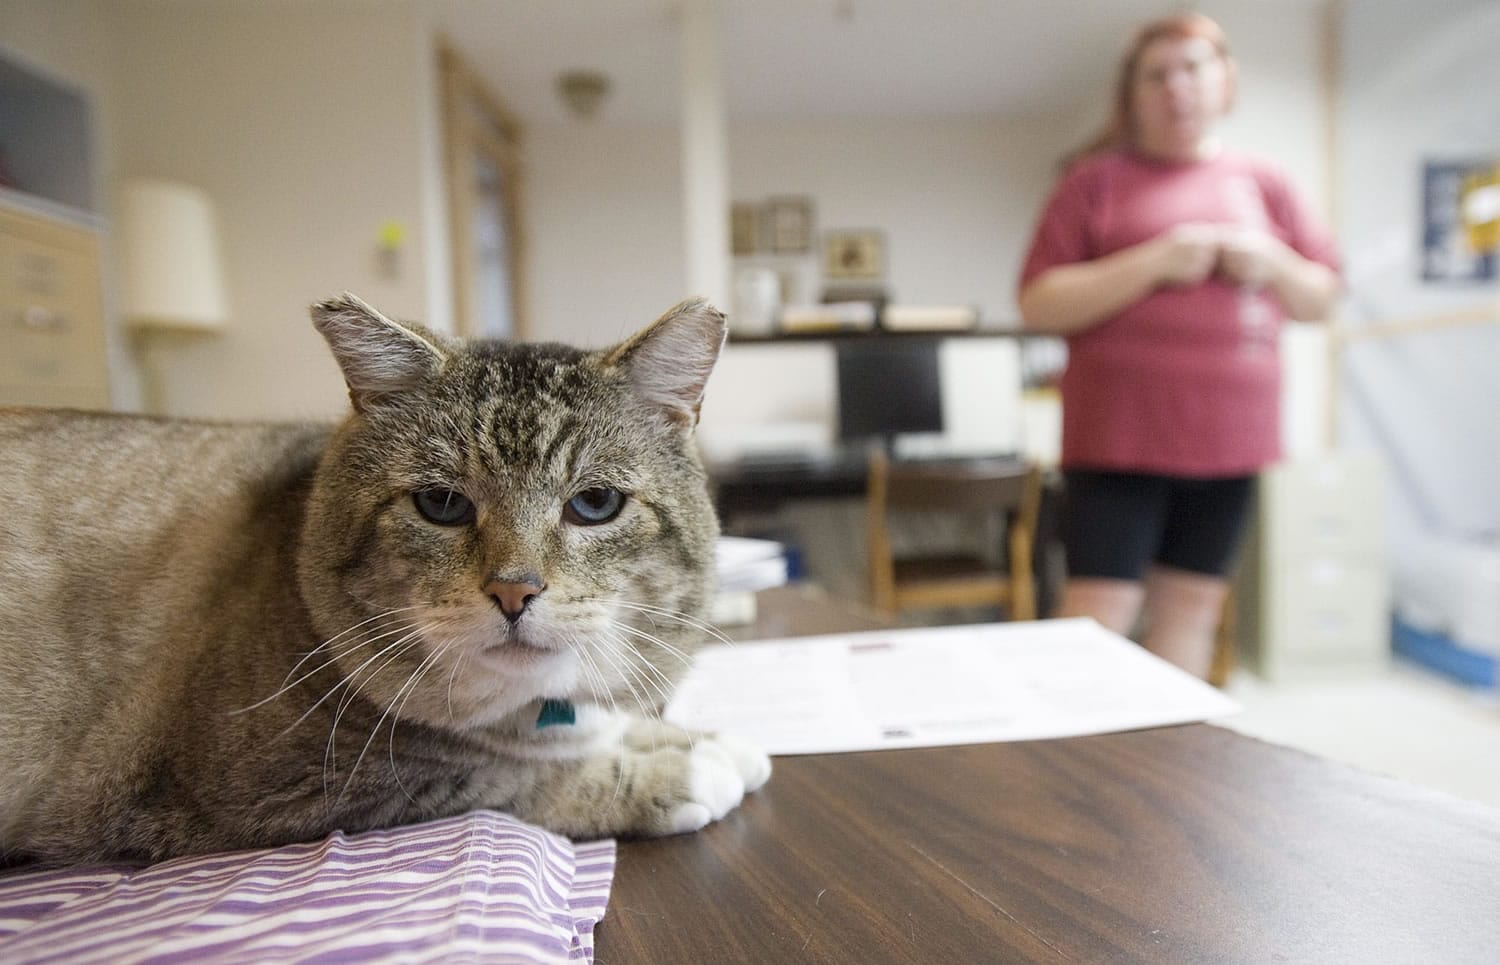 Zabie makes himself comfortable on a table at the Furry Friends halfway house as volunteer Cindy Goodrich checks on him.